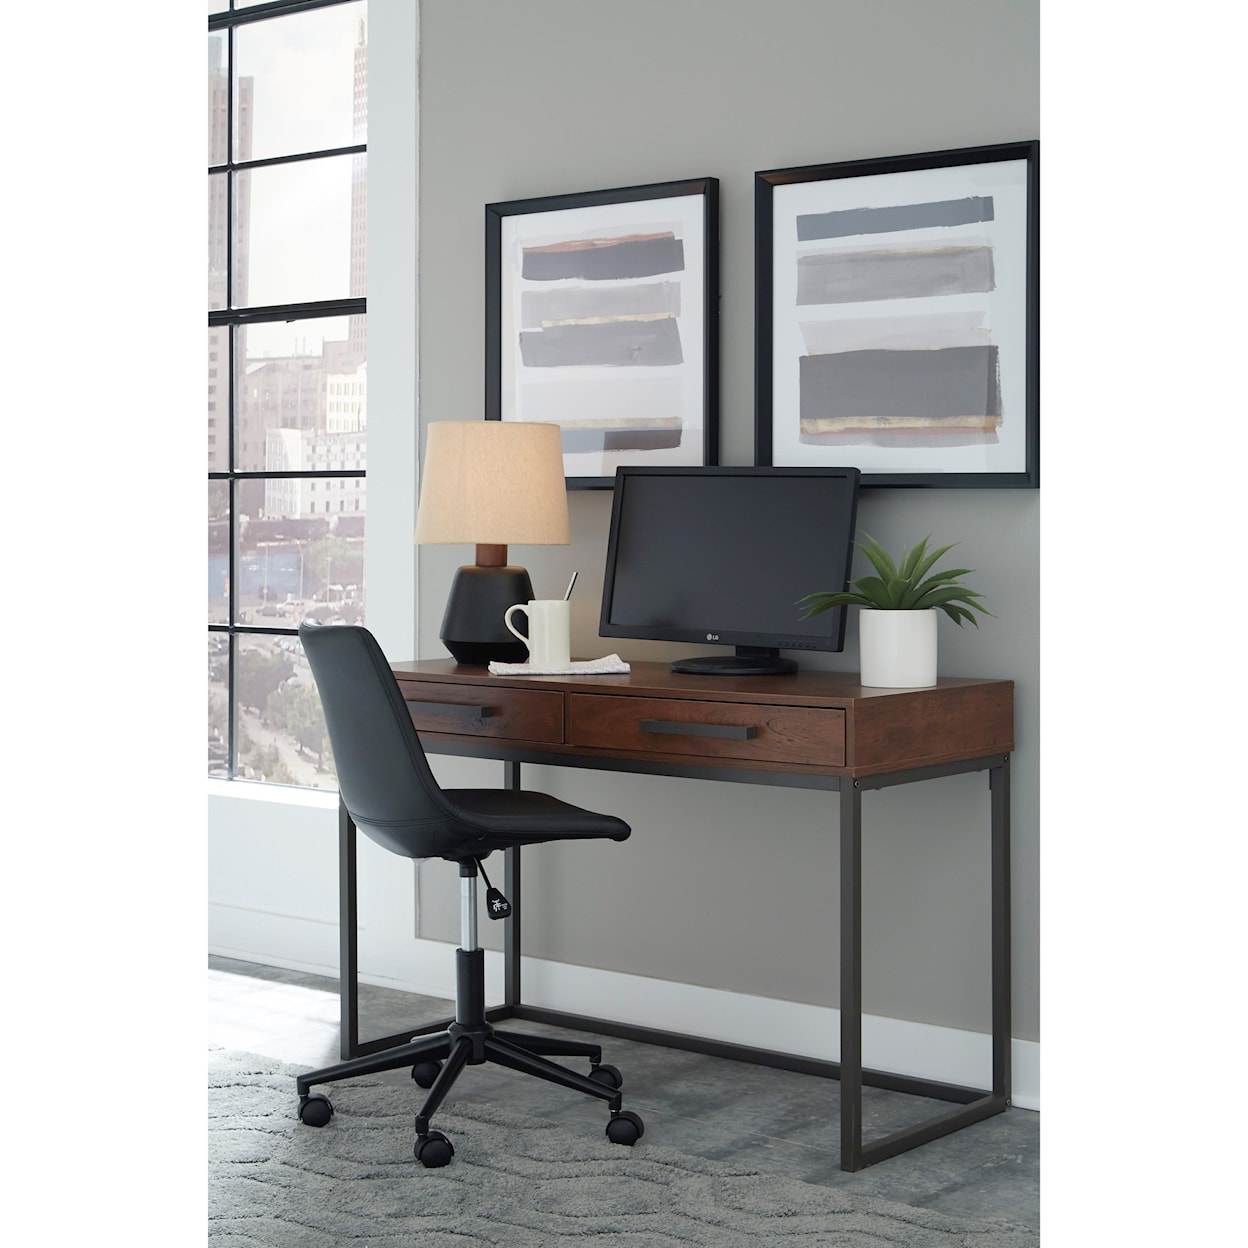 Signature Design by Ashley Horatio Home Office Small Desk